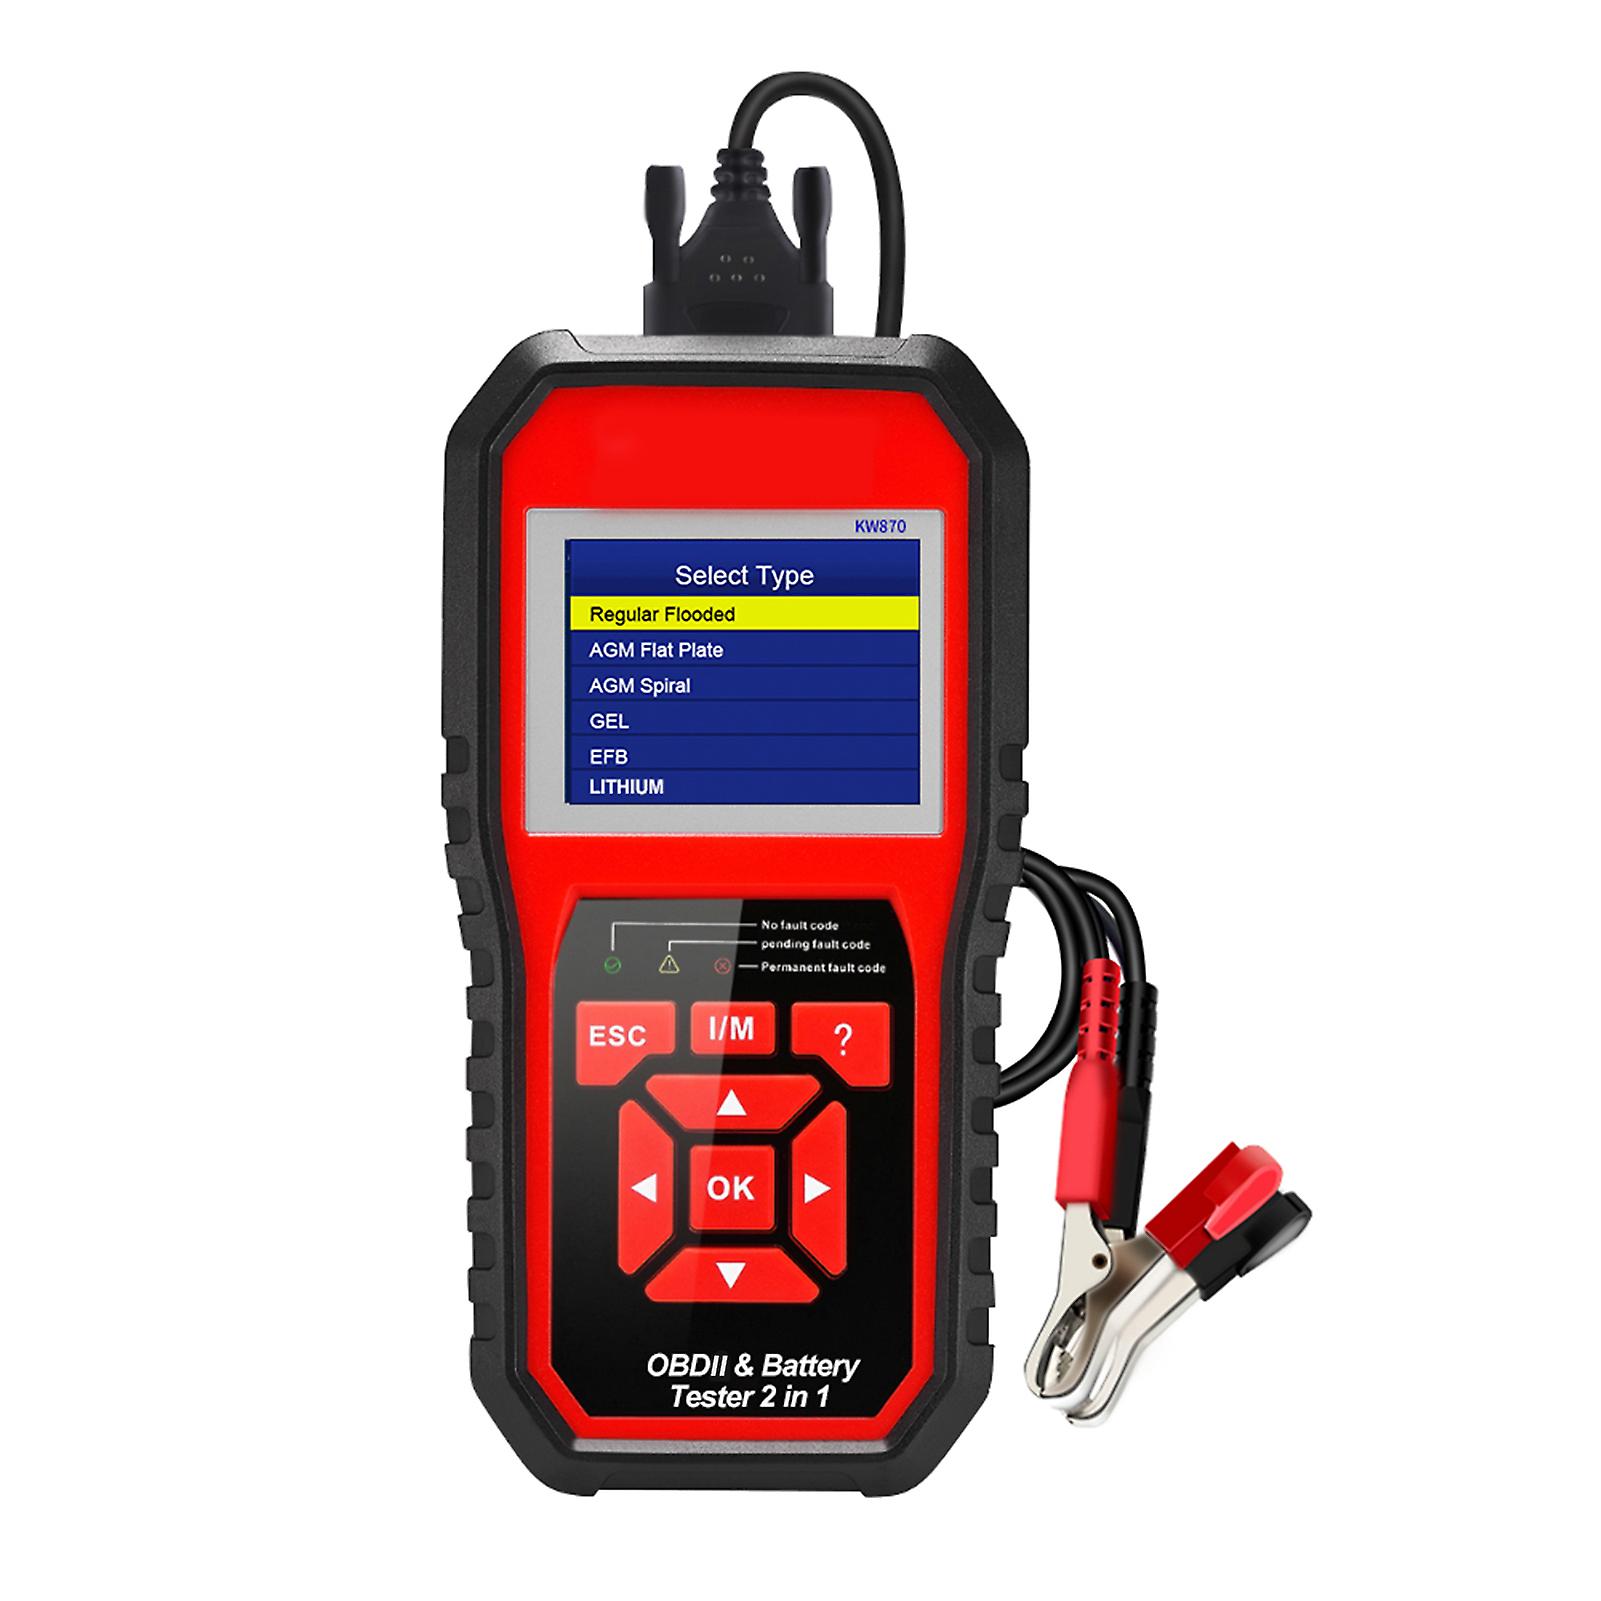 Konnwei Obdii Auto Diagnostic Code Scanner (kw870) Universal Car Battery Tester 2 In 1 Auto Diagnostic Scan Tools